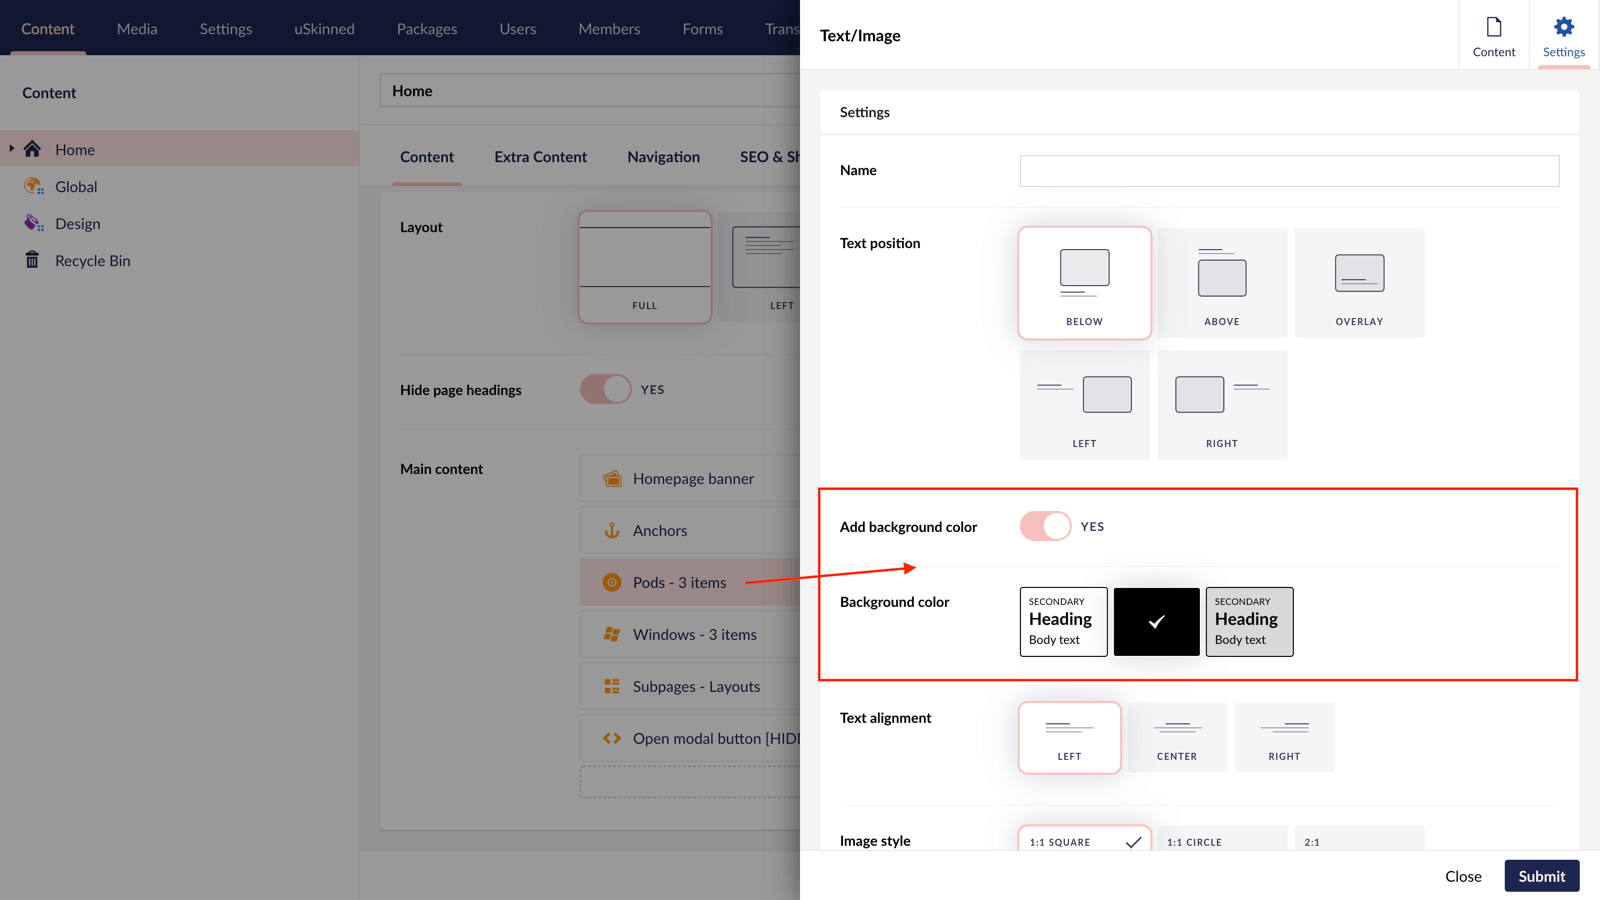 New background color options in uSkinned for Umbraco CMS.